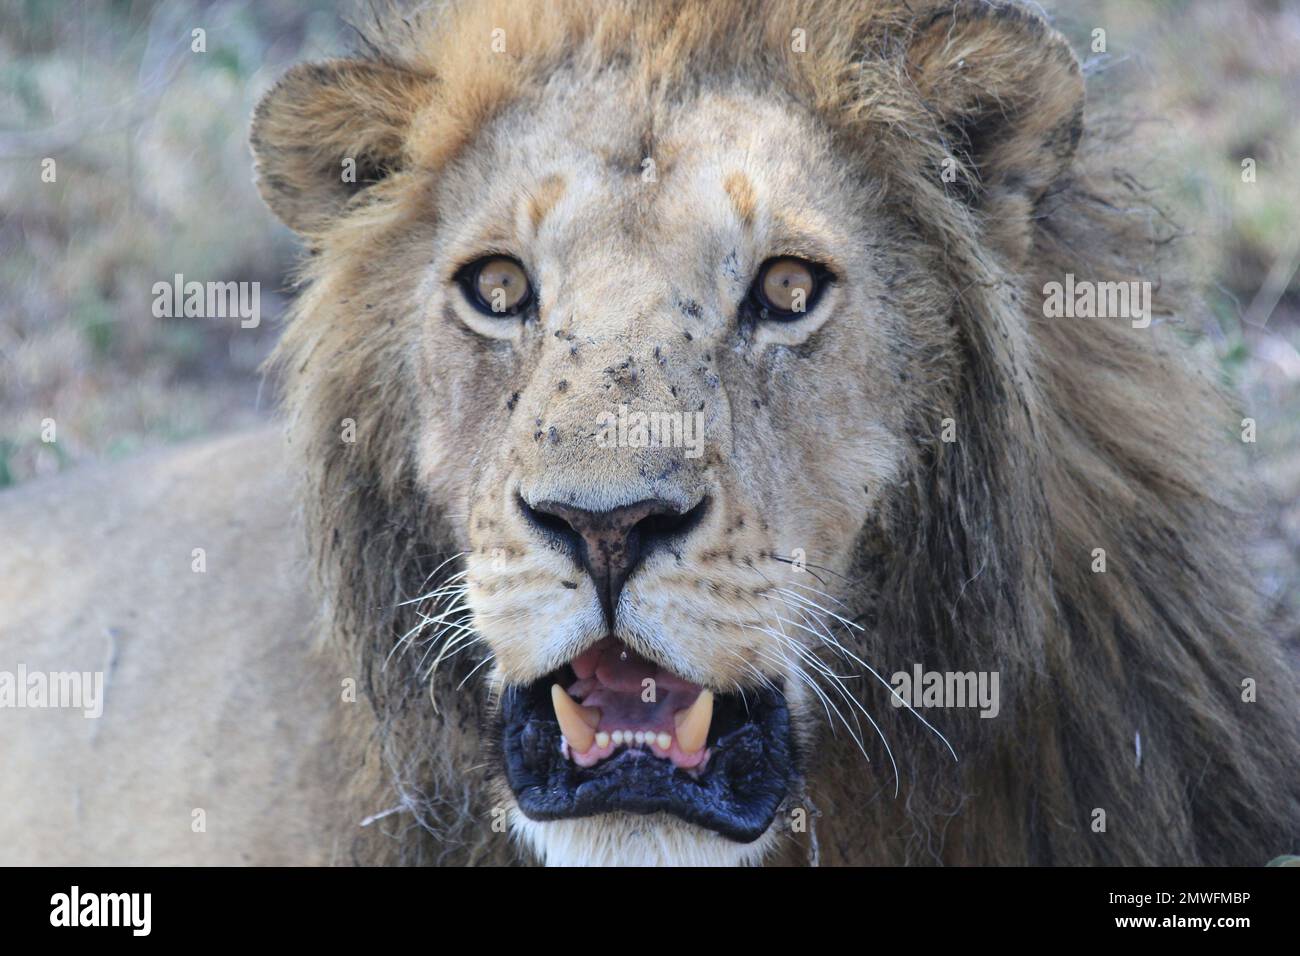 Adult Male Lion Growling Stock Photo